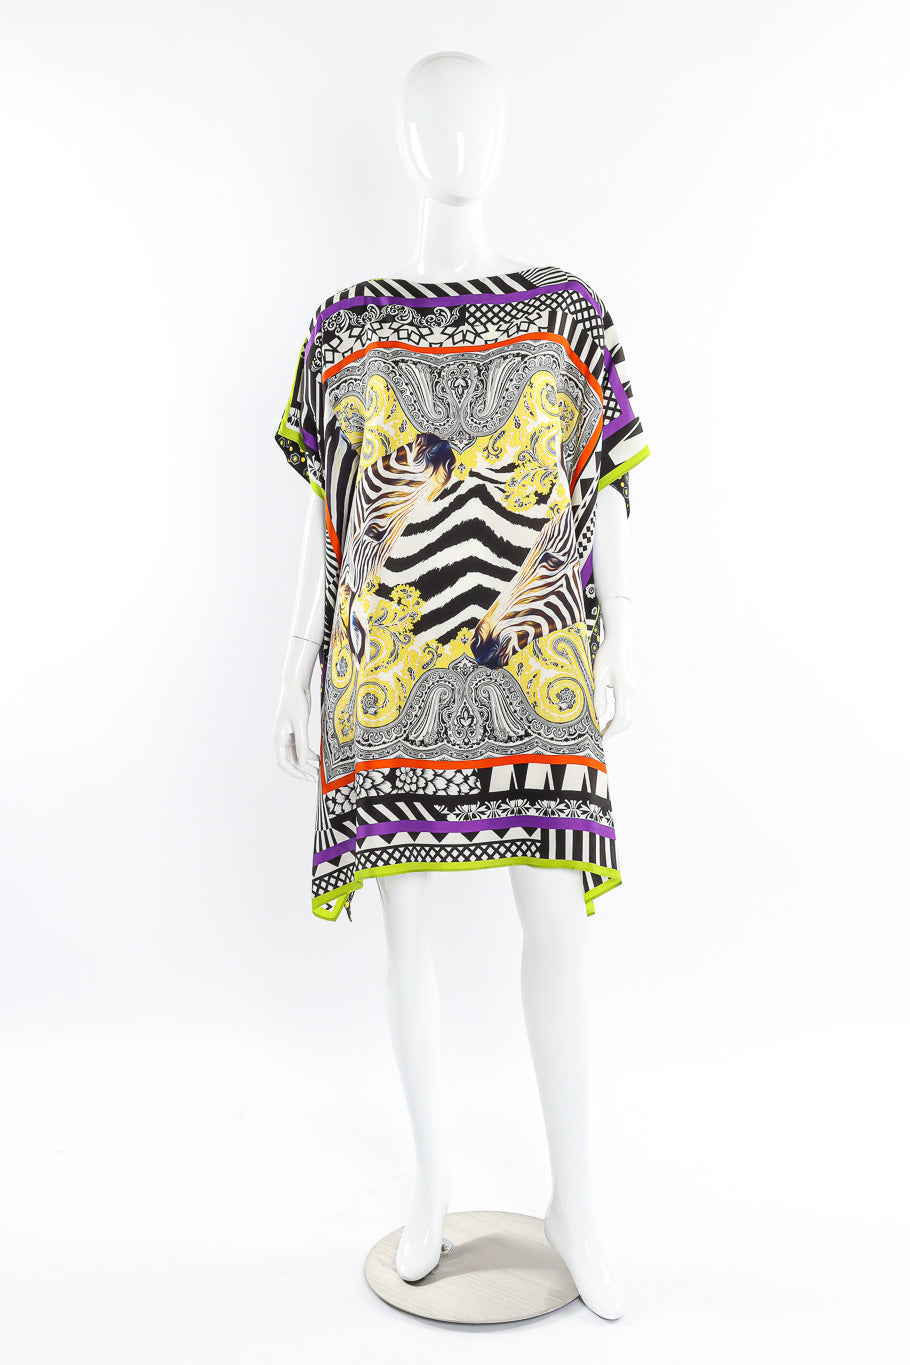 Poncho scarf top by Etro mannequin front full @recessla